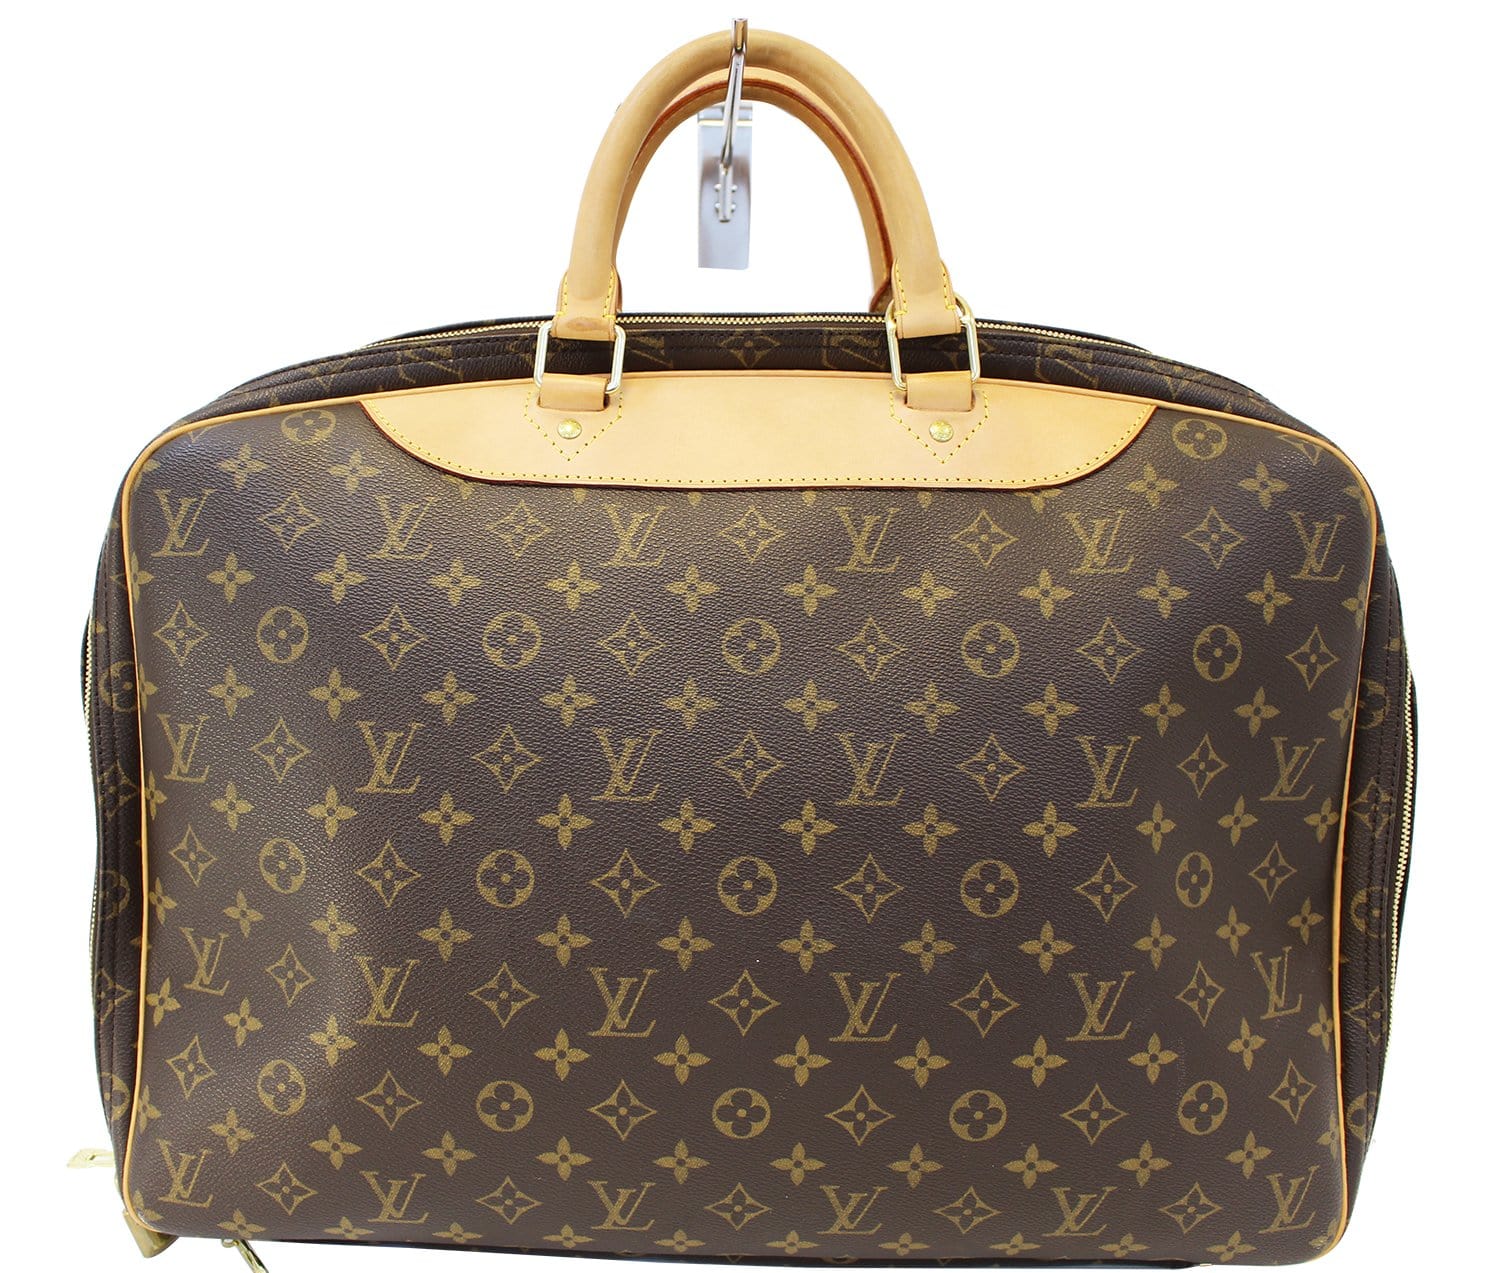 Shop Louis Vuitton MONOGRAM Unisex Street Style Carry-on Luggage & Travel  Bags (M10241) by IledesPins